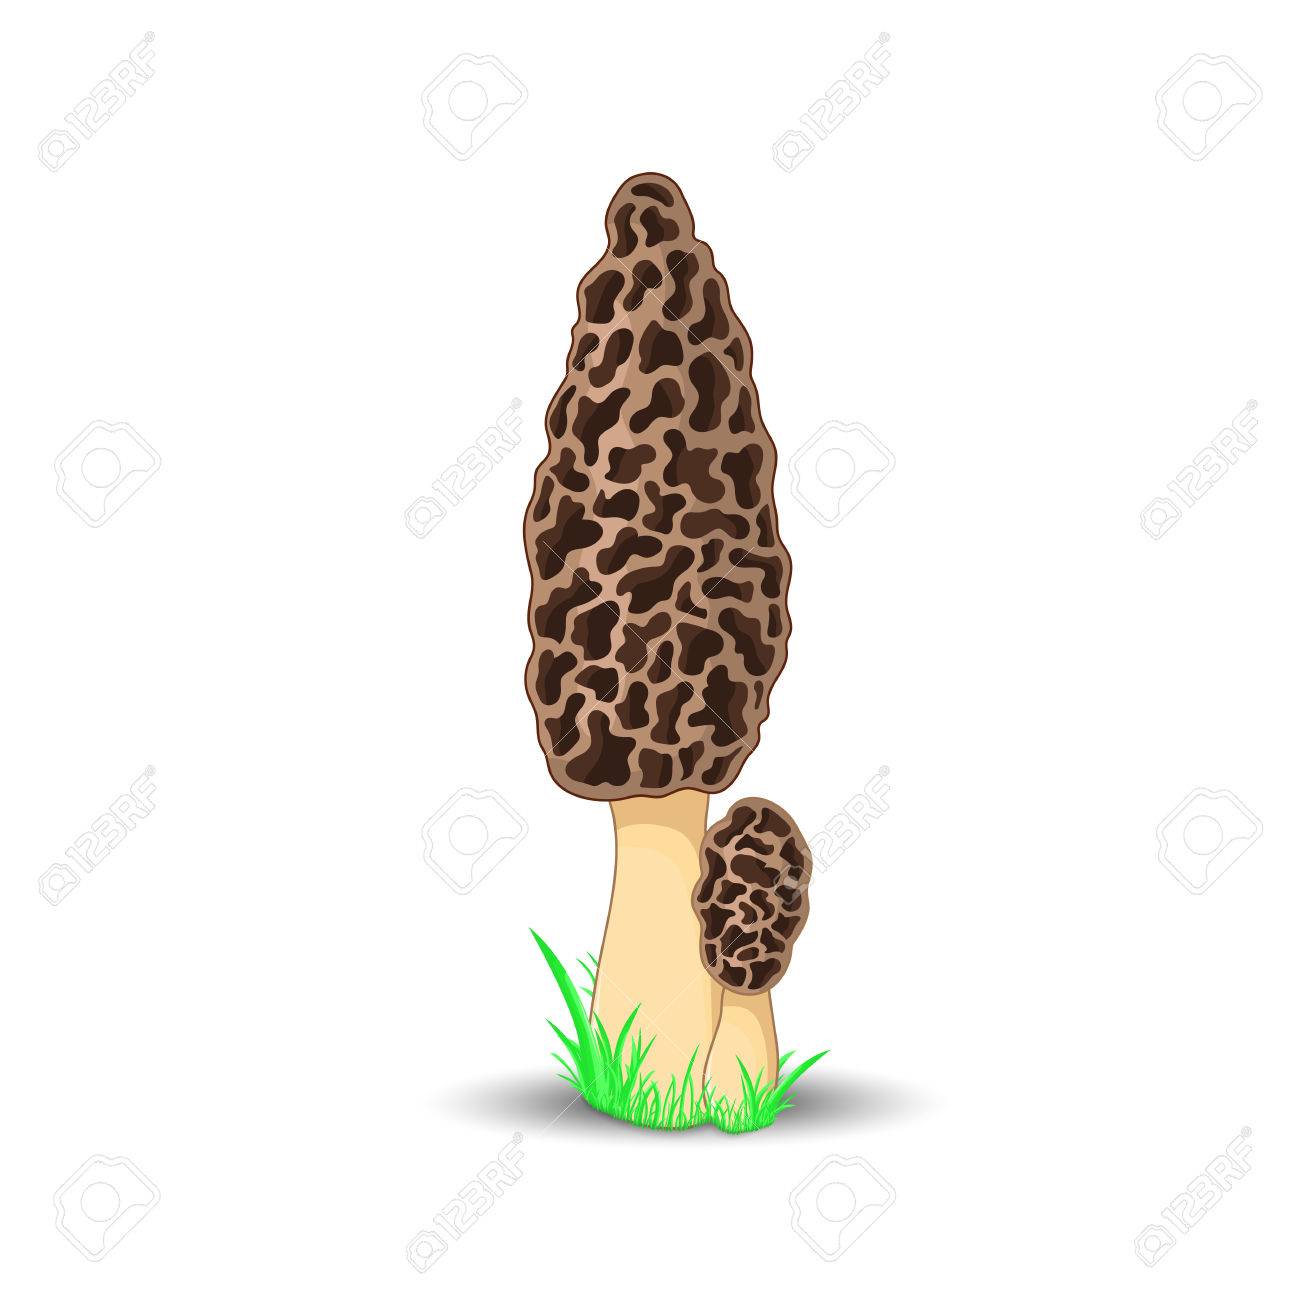 Morel Mushroom Surround Isolated On White Background With Grass